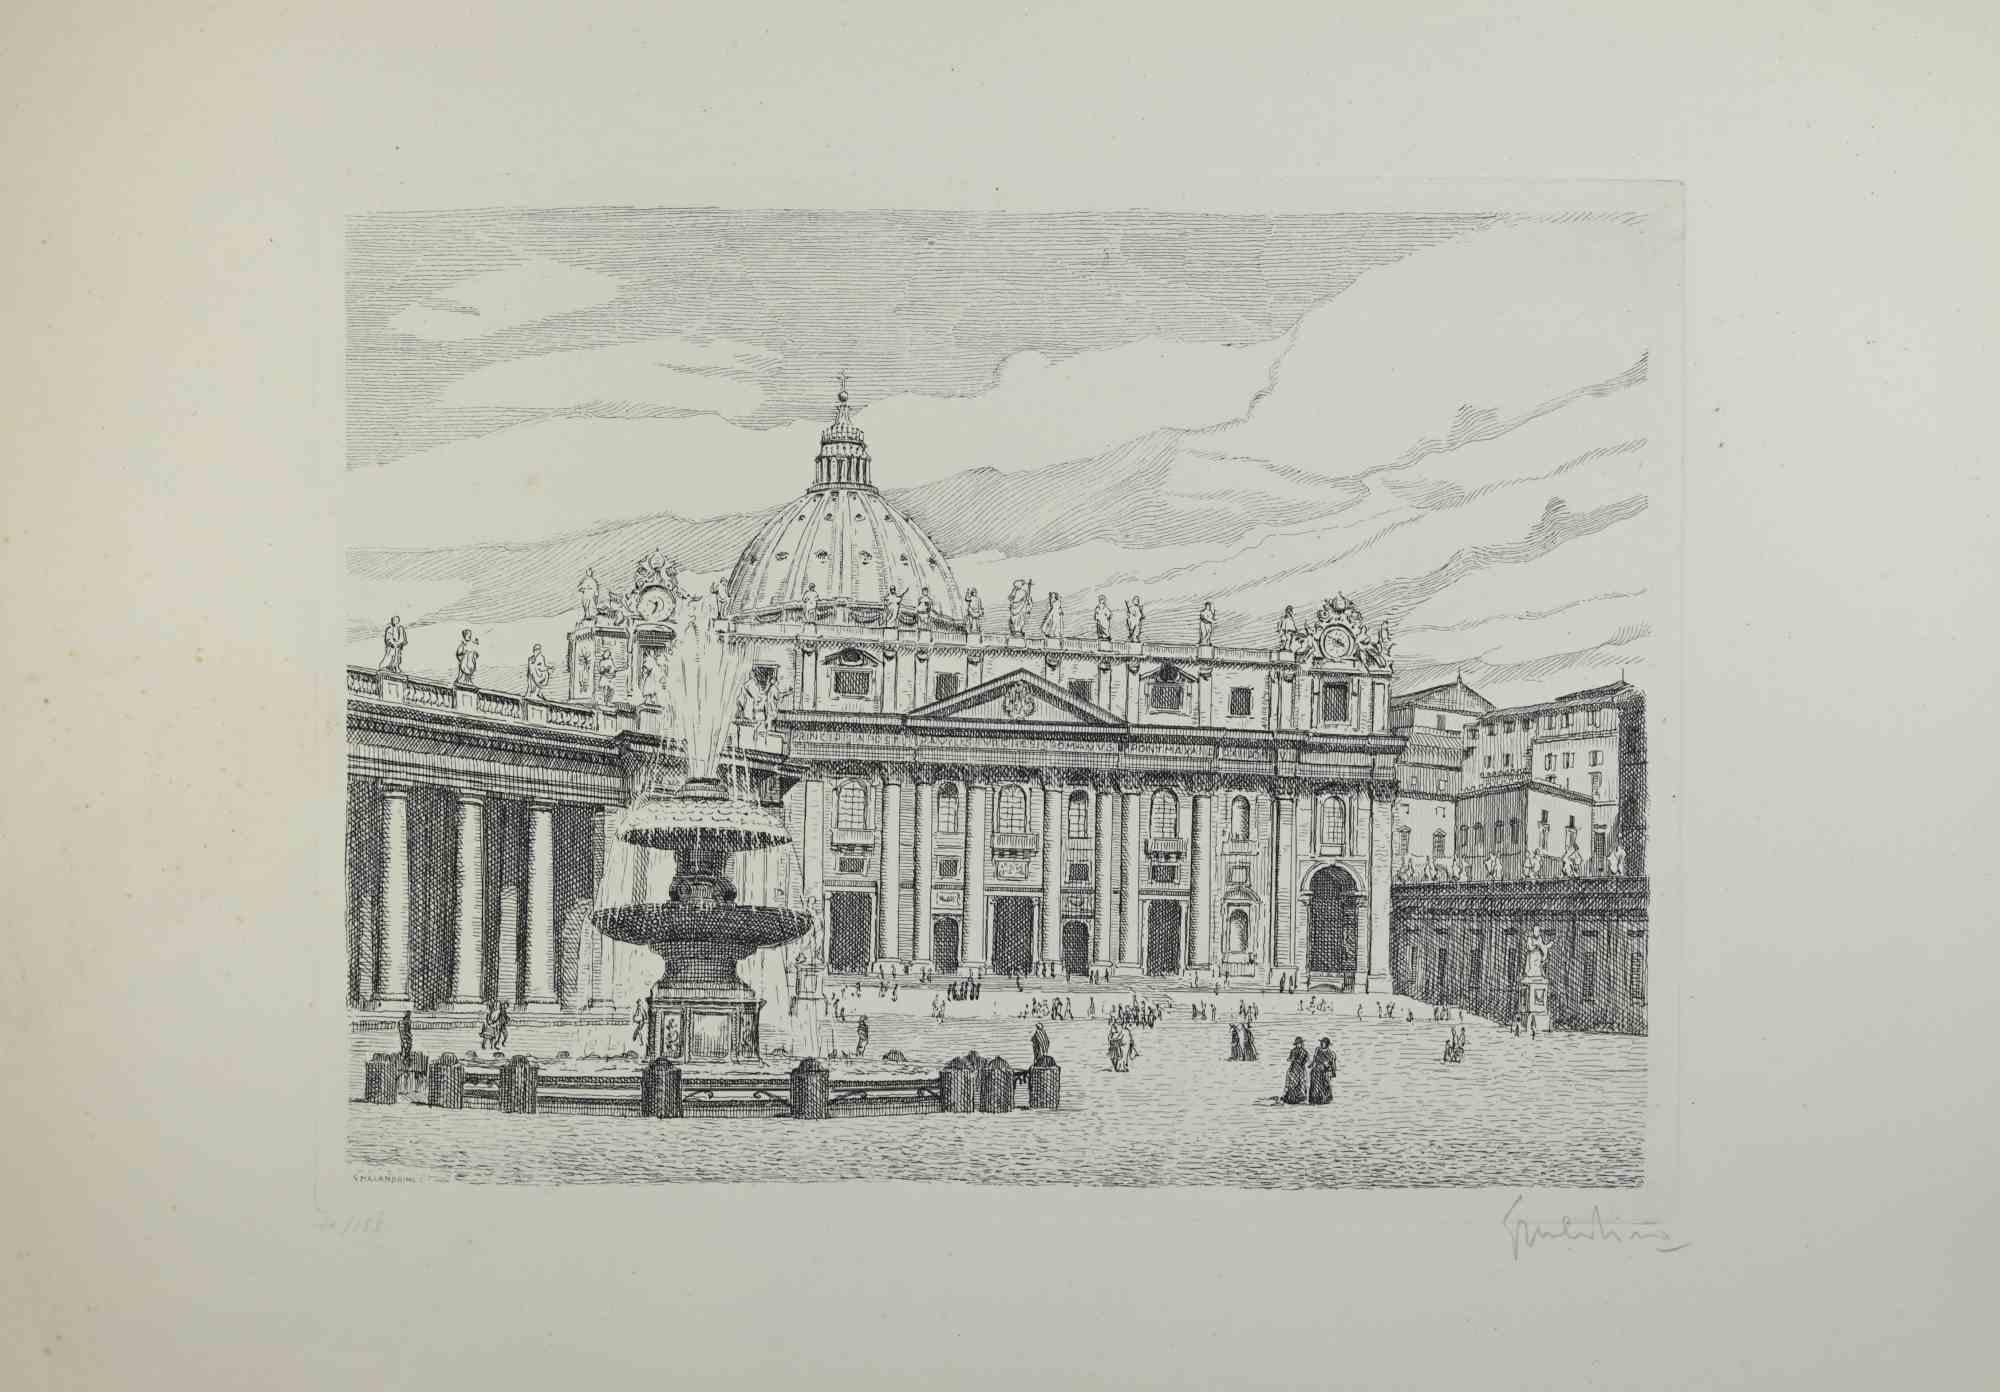 Saint Peter is an artwork realized by Giuseppe Malandrino.

Print in etching technique

Hand-signed by the artist in pencil on the lower right corner.

Numbered edition,80/199.

Good condition.

This artwork represents the beautiful Roman landscape